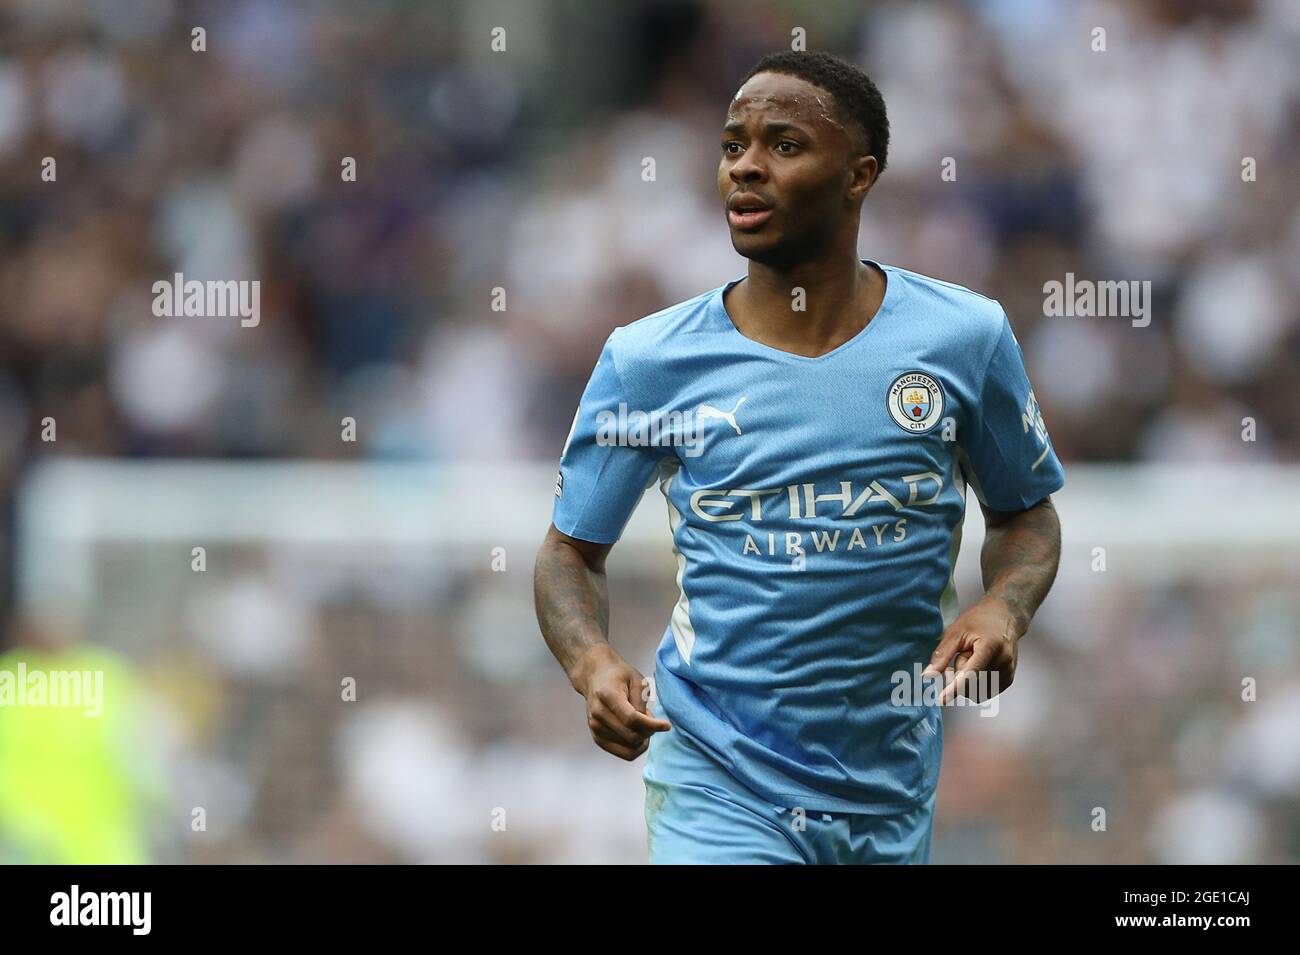 London, England, 15th August 2021. Raheem Sterling of Manchester City during the Premier League match at the Tottenham Hotspur Stadium, London. Picture credit should read: Paul Terry / Sportimage Credit: Sportimage/Alamy Live News Stock Photo